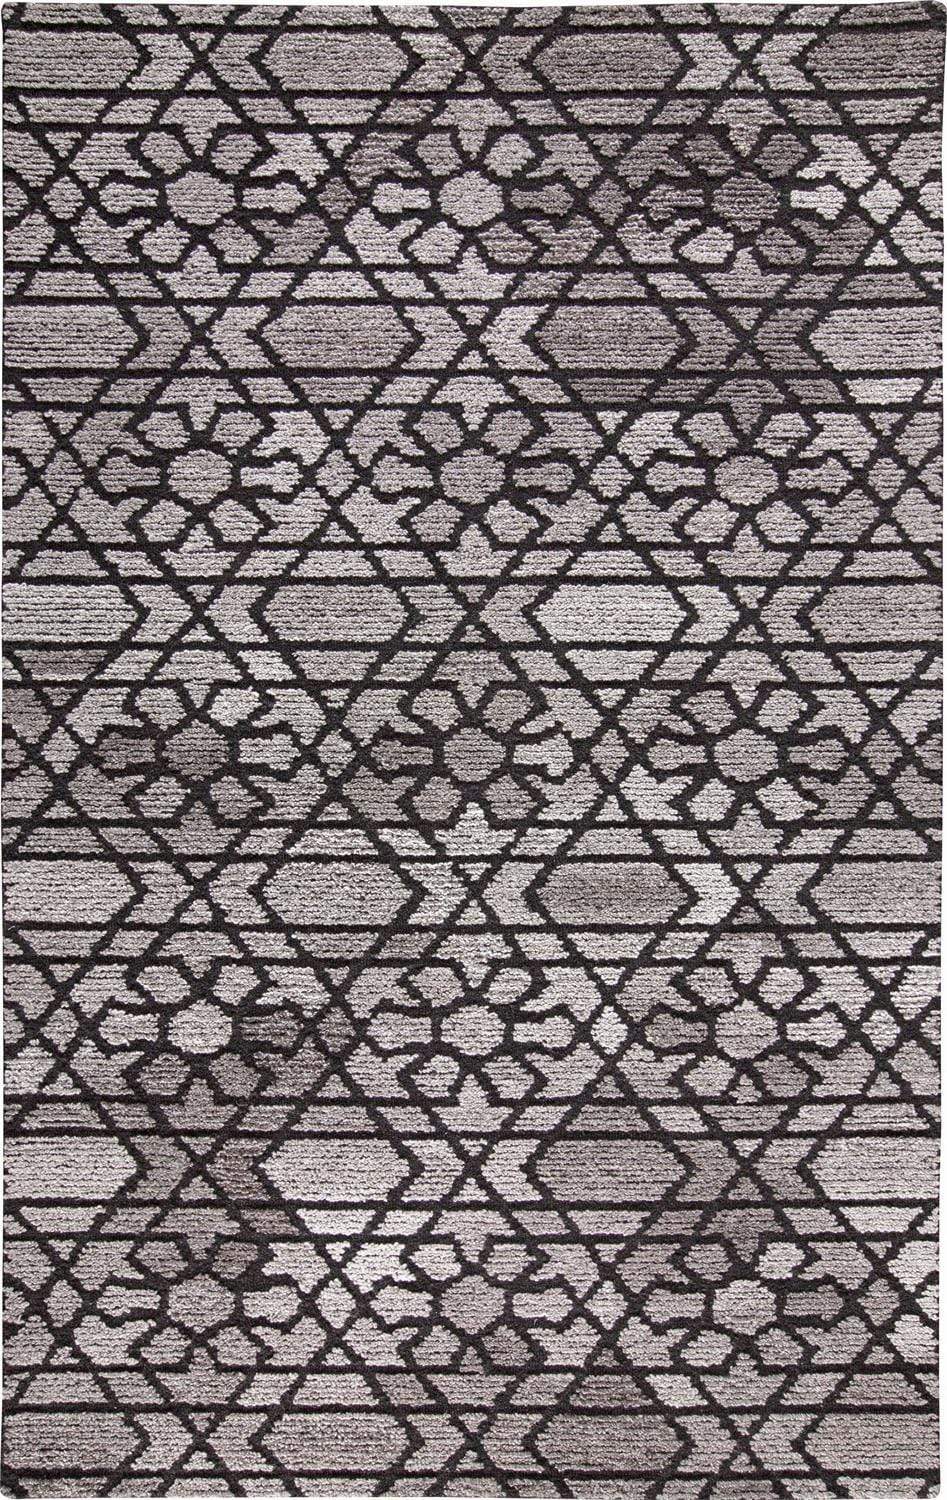 Feizy Feizy Asher Lustrous Tufted Wool Rug - Light Gray & Black - Available in 9 Sizes 3'-6" x 5'-6" 8638766FGRYCHLC50